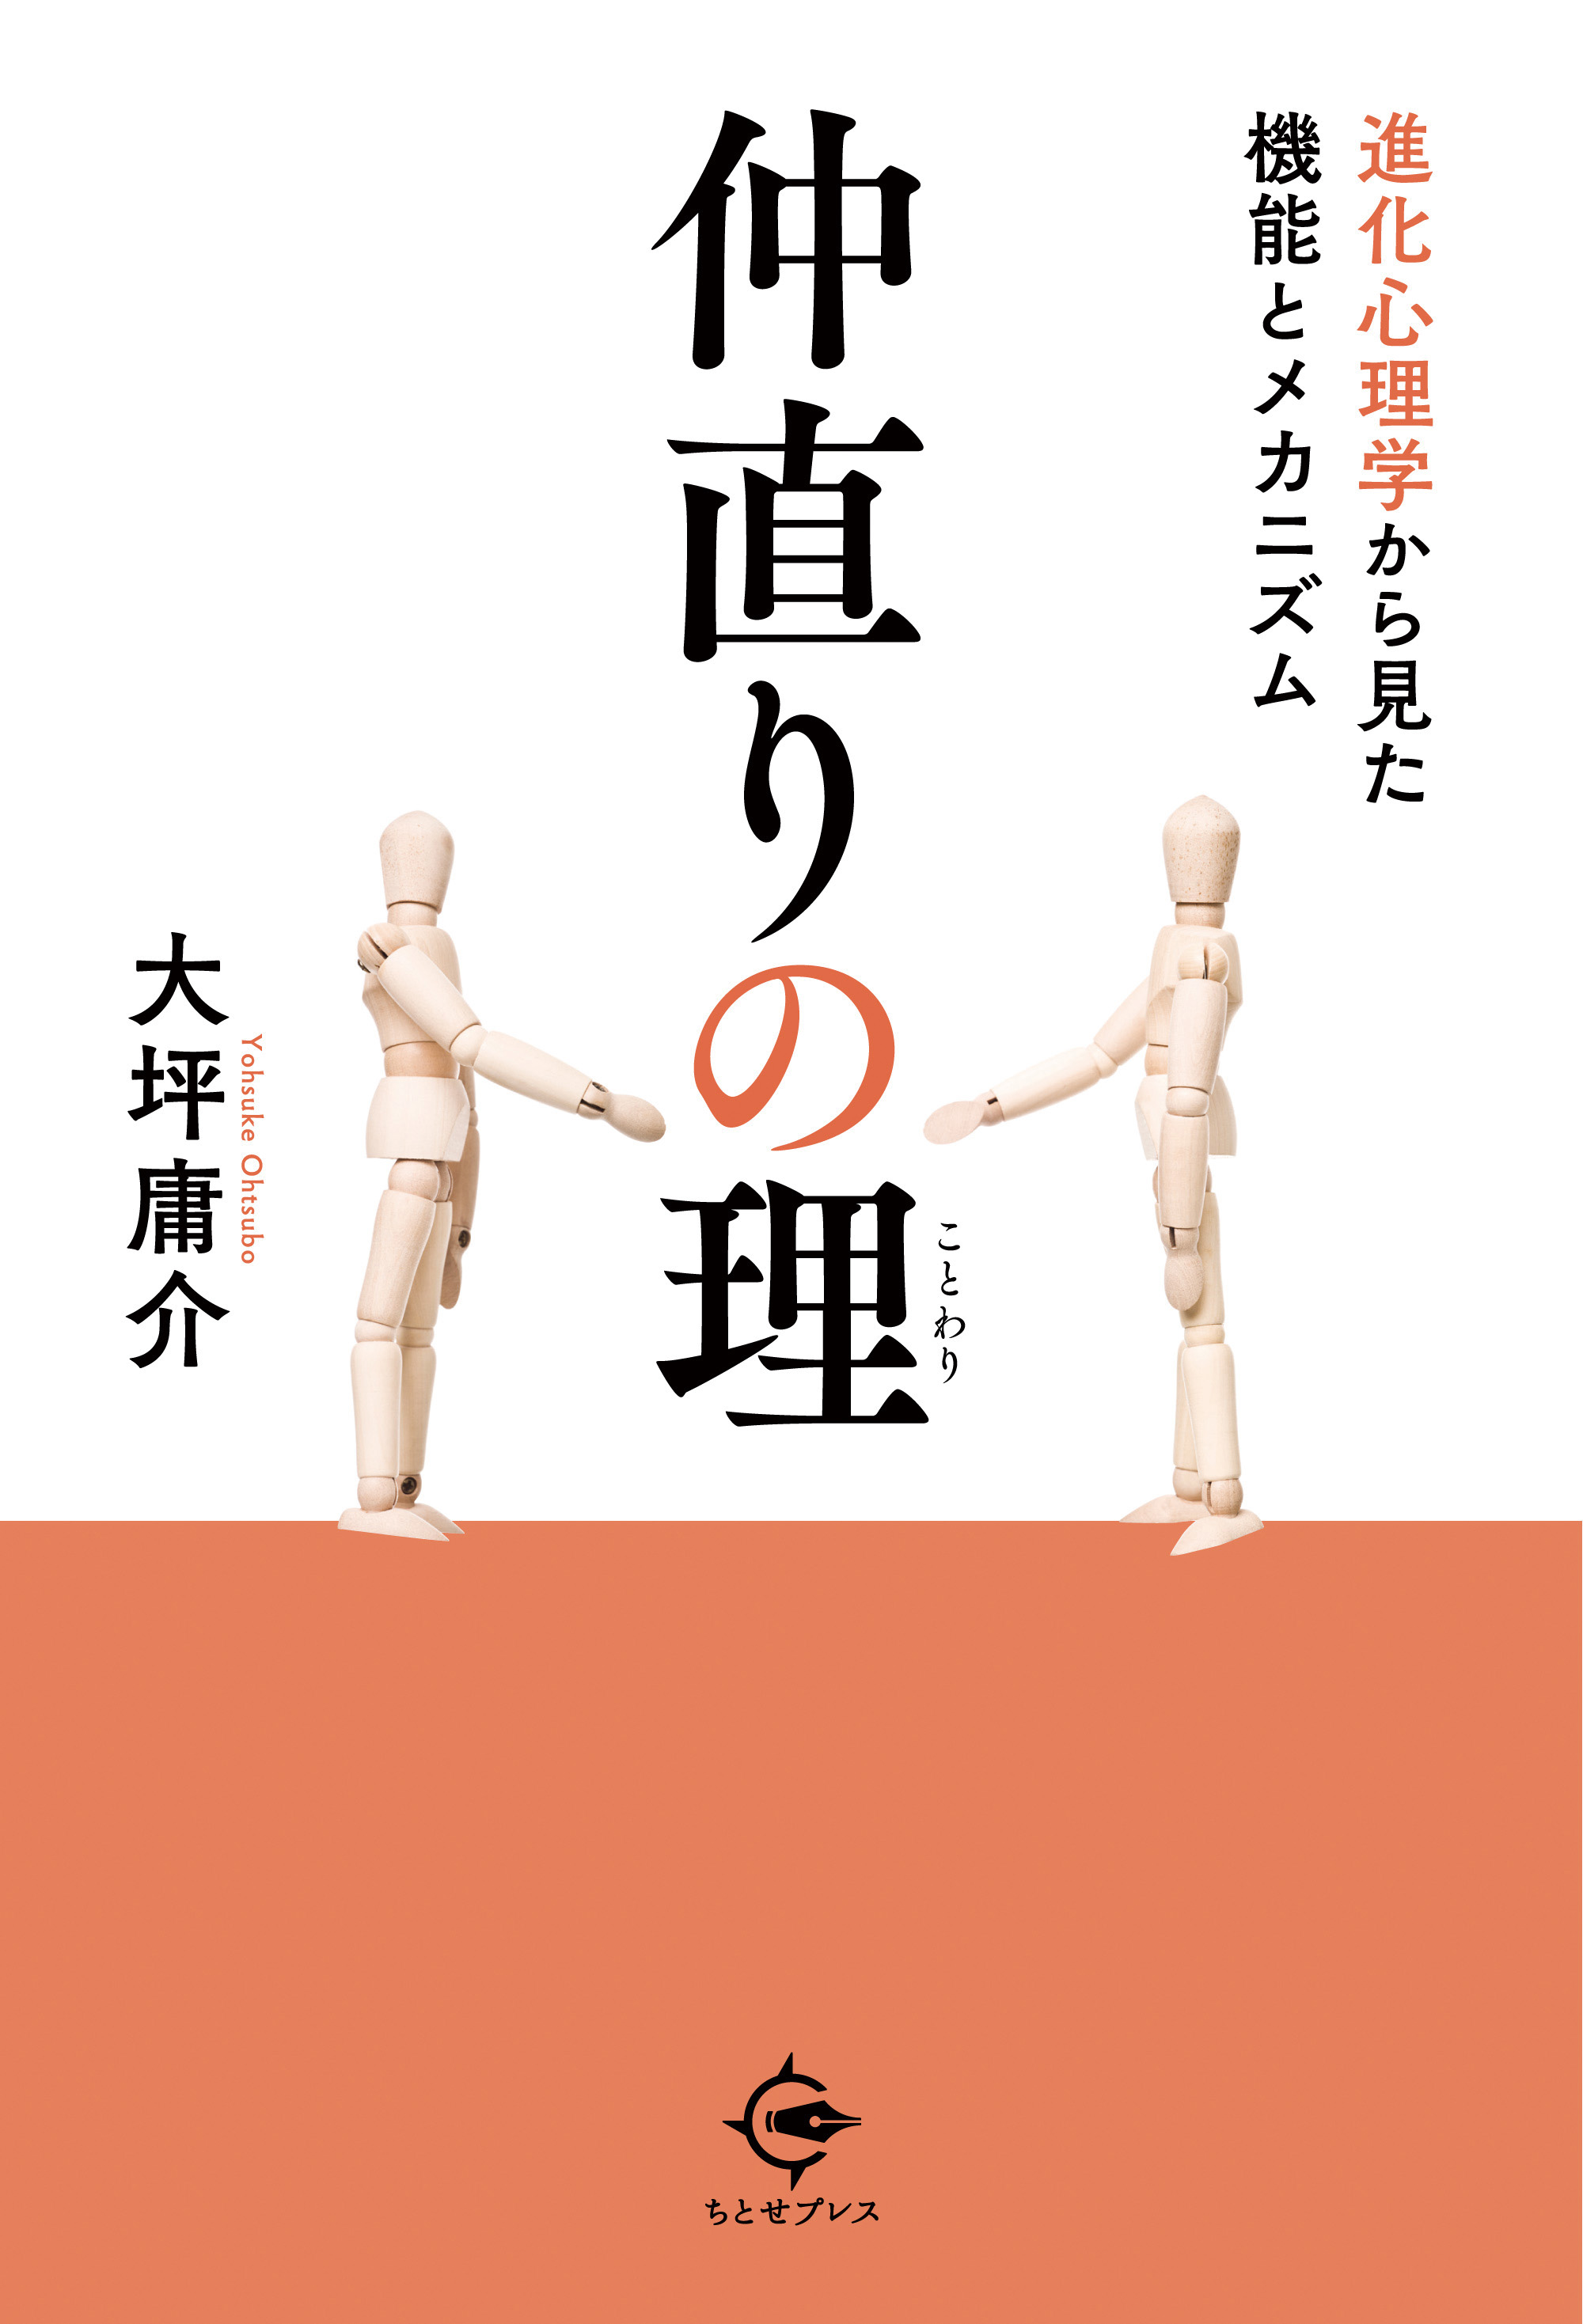 White and orange cover with a picture of drawing dolls